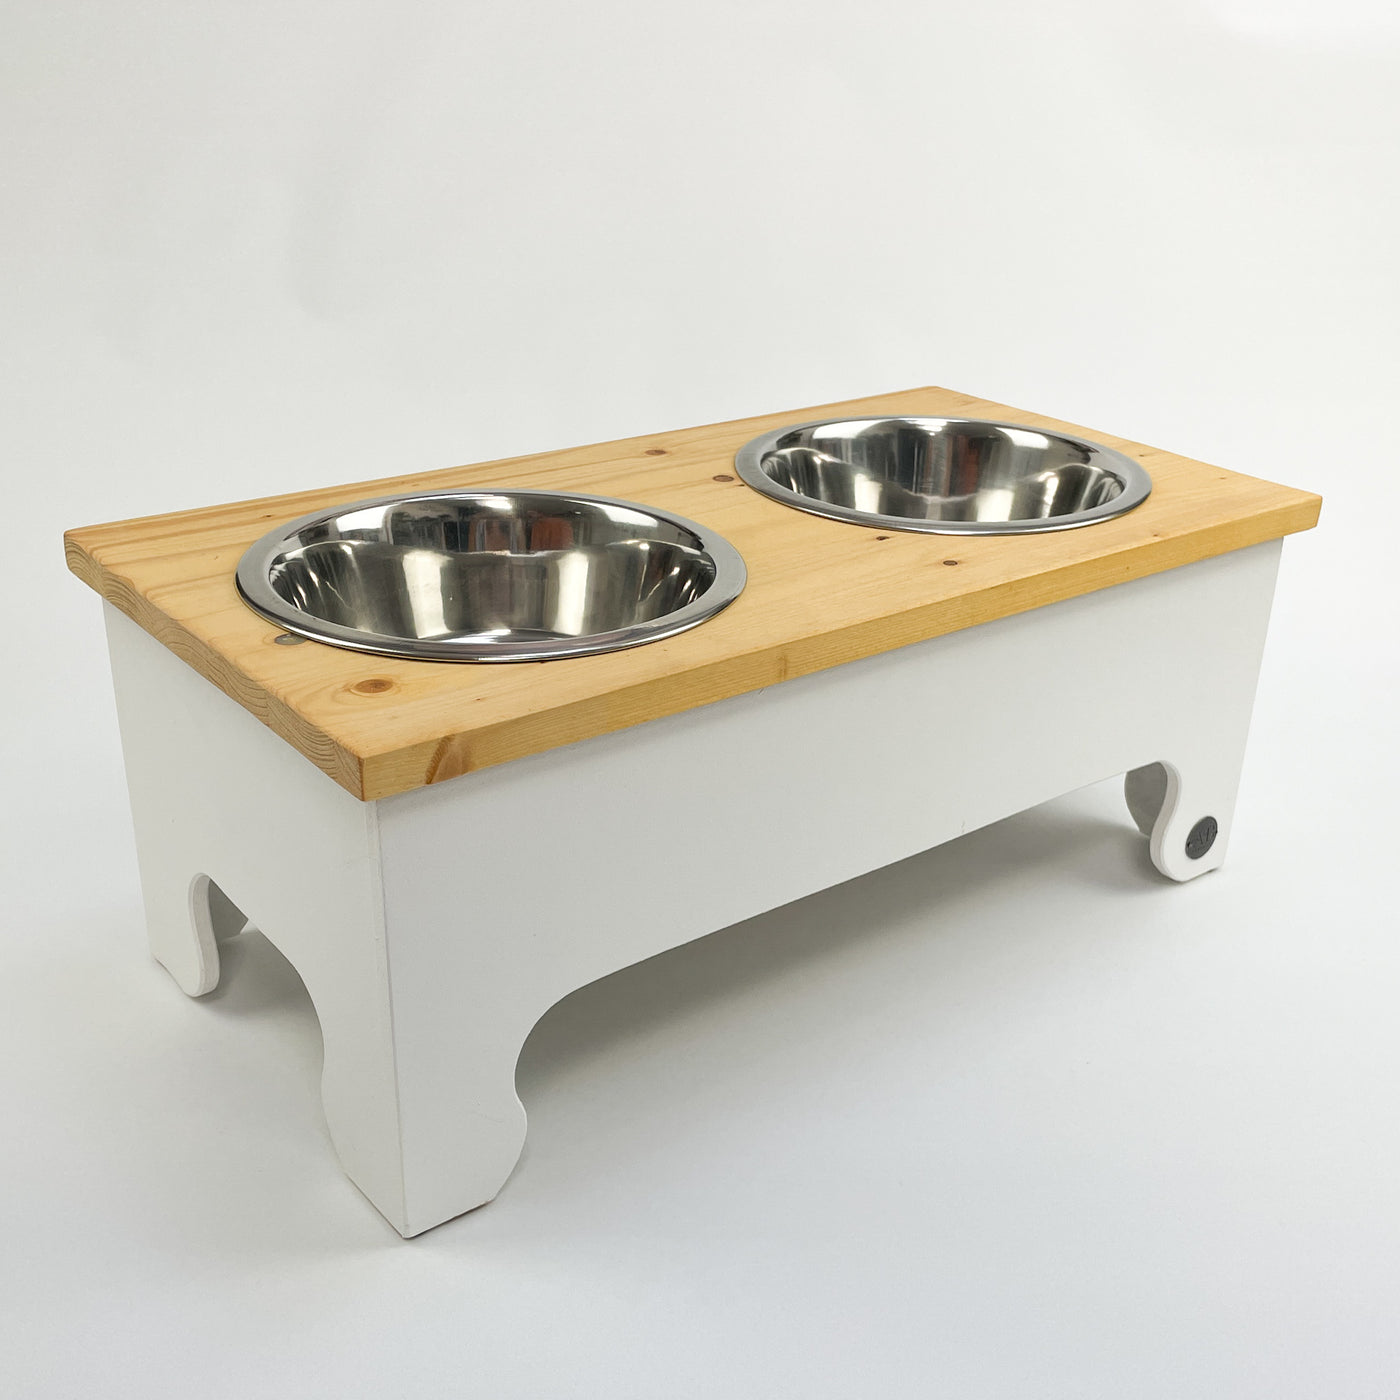 Raised dog bowl feeding stand, white with a natural pine top.